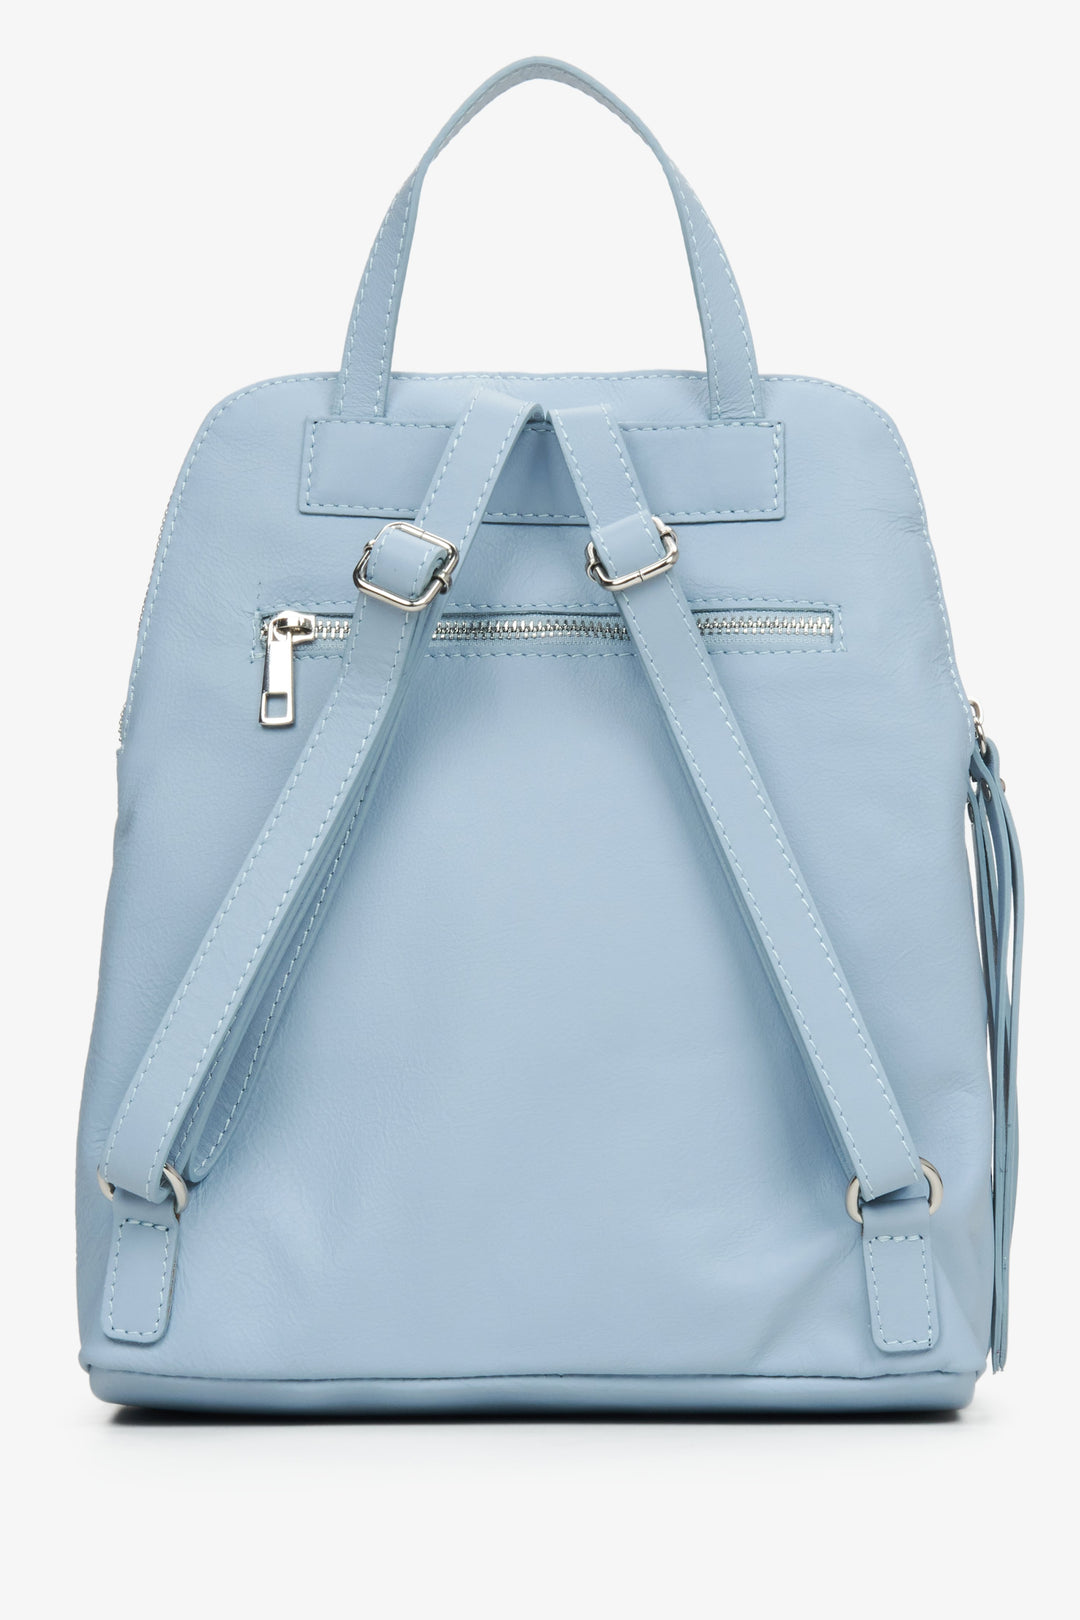 Women's leather light blue Estro backpack - close-up on the back of the model.